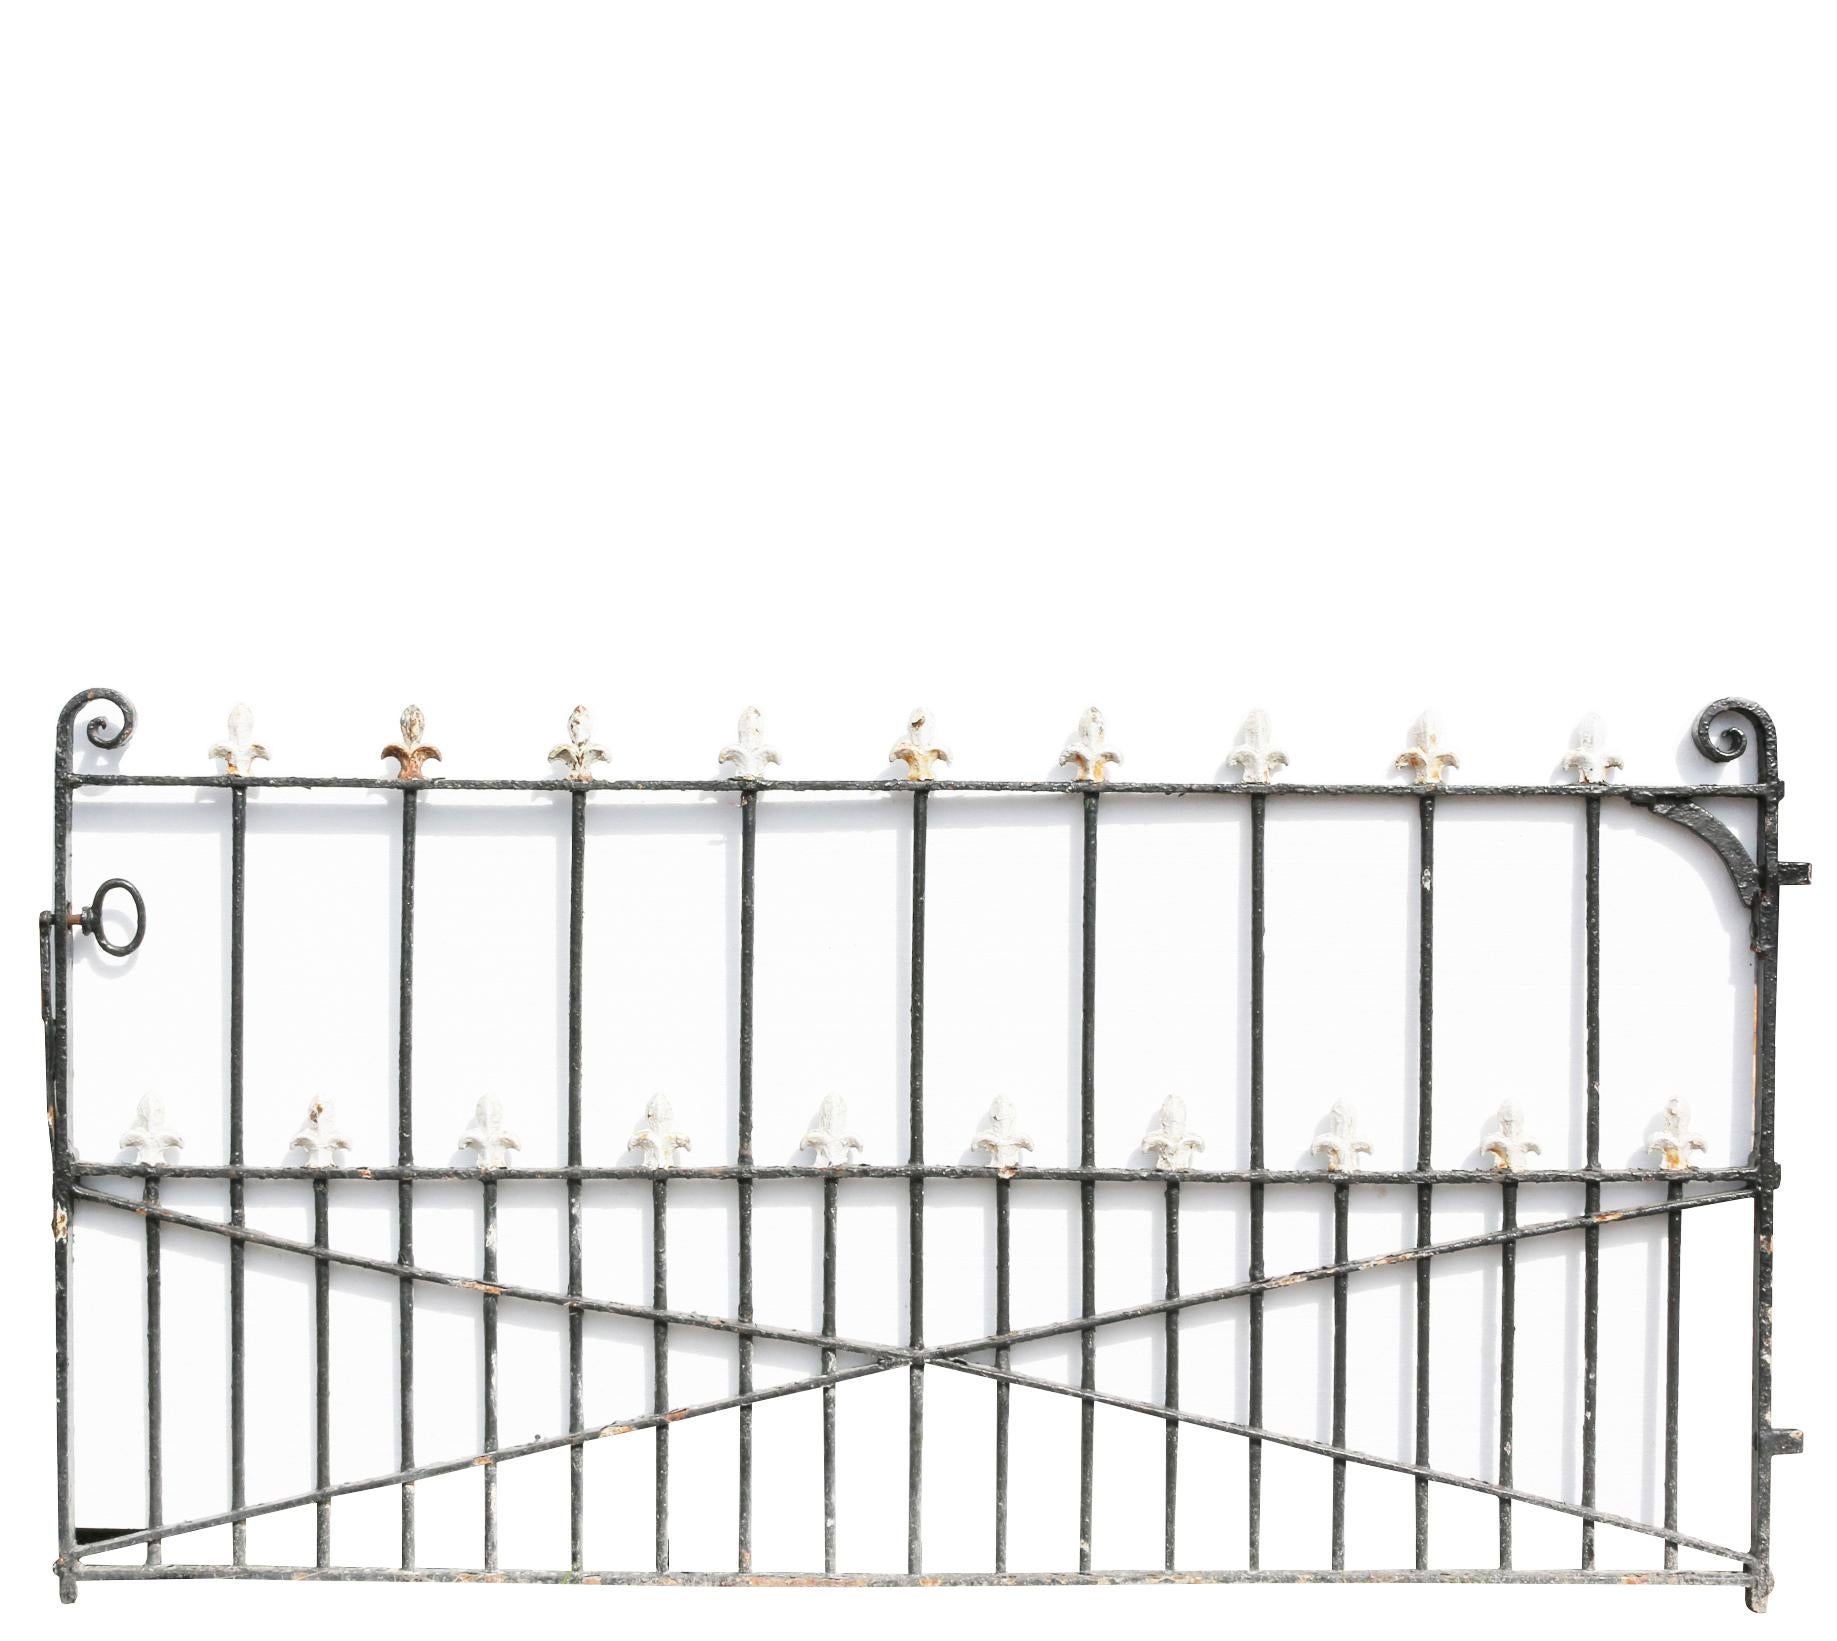 Antique Wrought Iron Entry Gate In Good Condition For Sale In Wormelow, Herefordshire